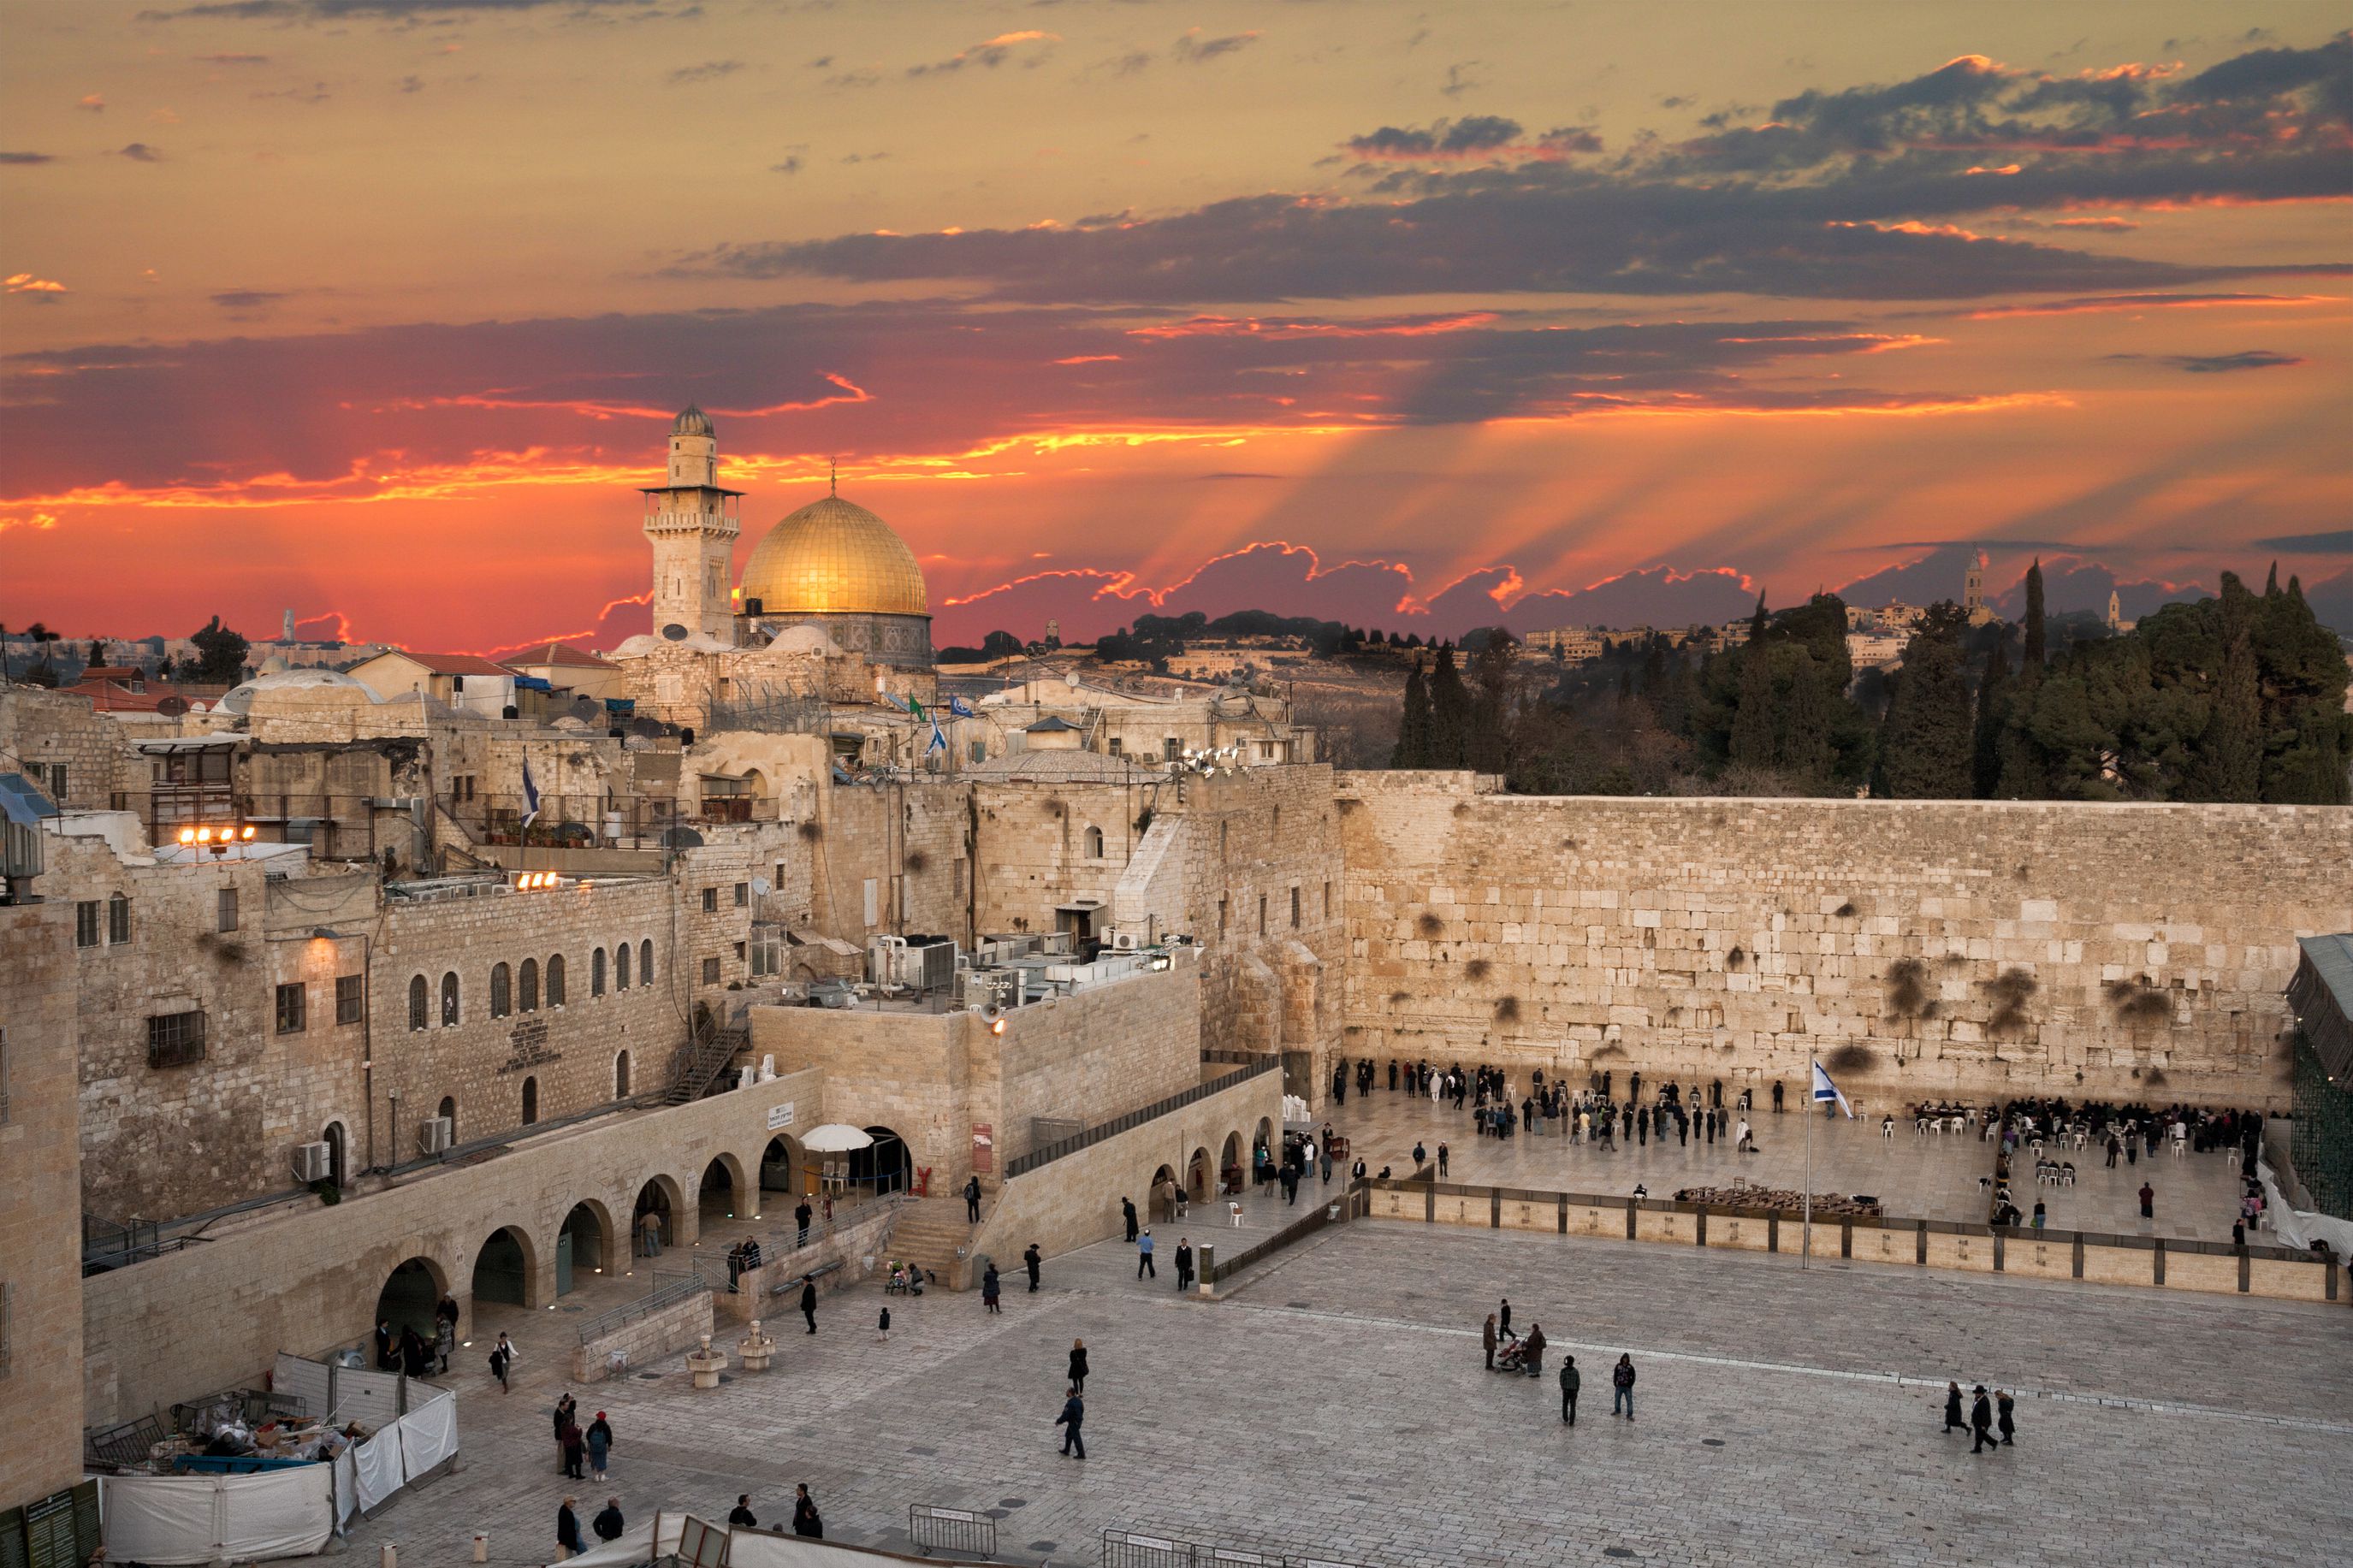 <p>There are three distinct districts in Jerusalem. The Old City is home to the holy sites of Judaism, Christianity, and Islam. During the day, the markets are bustling with traders selling all kinds of goods, separated into Jewish, Muslim, Christian, and Armenian quarters.</p><p>The New City is mostly Jewish, containing centuries-old buildings and traditions that will leave you in awe.</p><p>Take time to visit the different districts to get a sense of the different cultures all thriving in Jerusalem. The Temple Mount, Western Wall, and Church of the Holy Sepulchre are all important sites to visit on a spiritual journey here.</p>